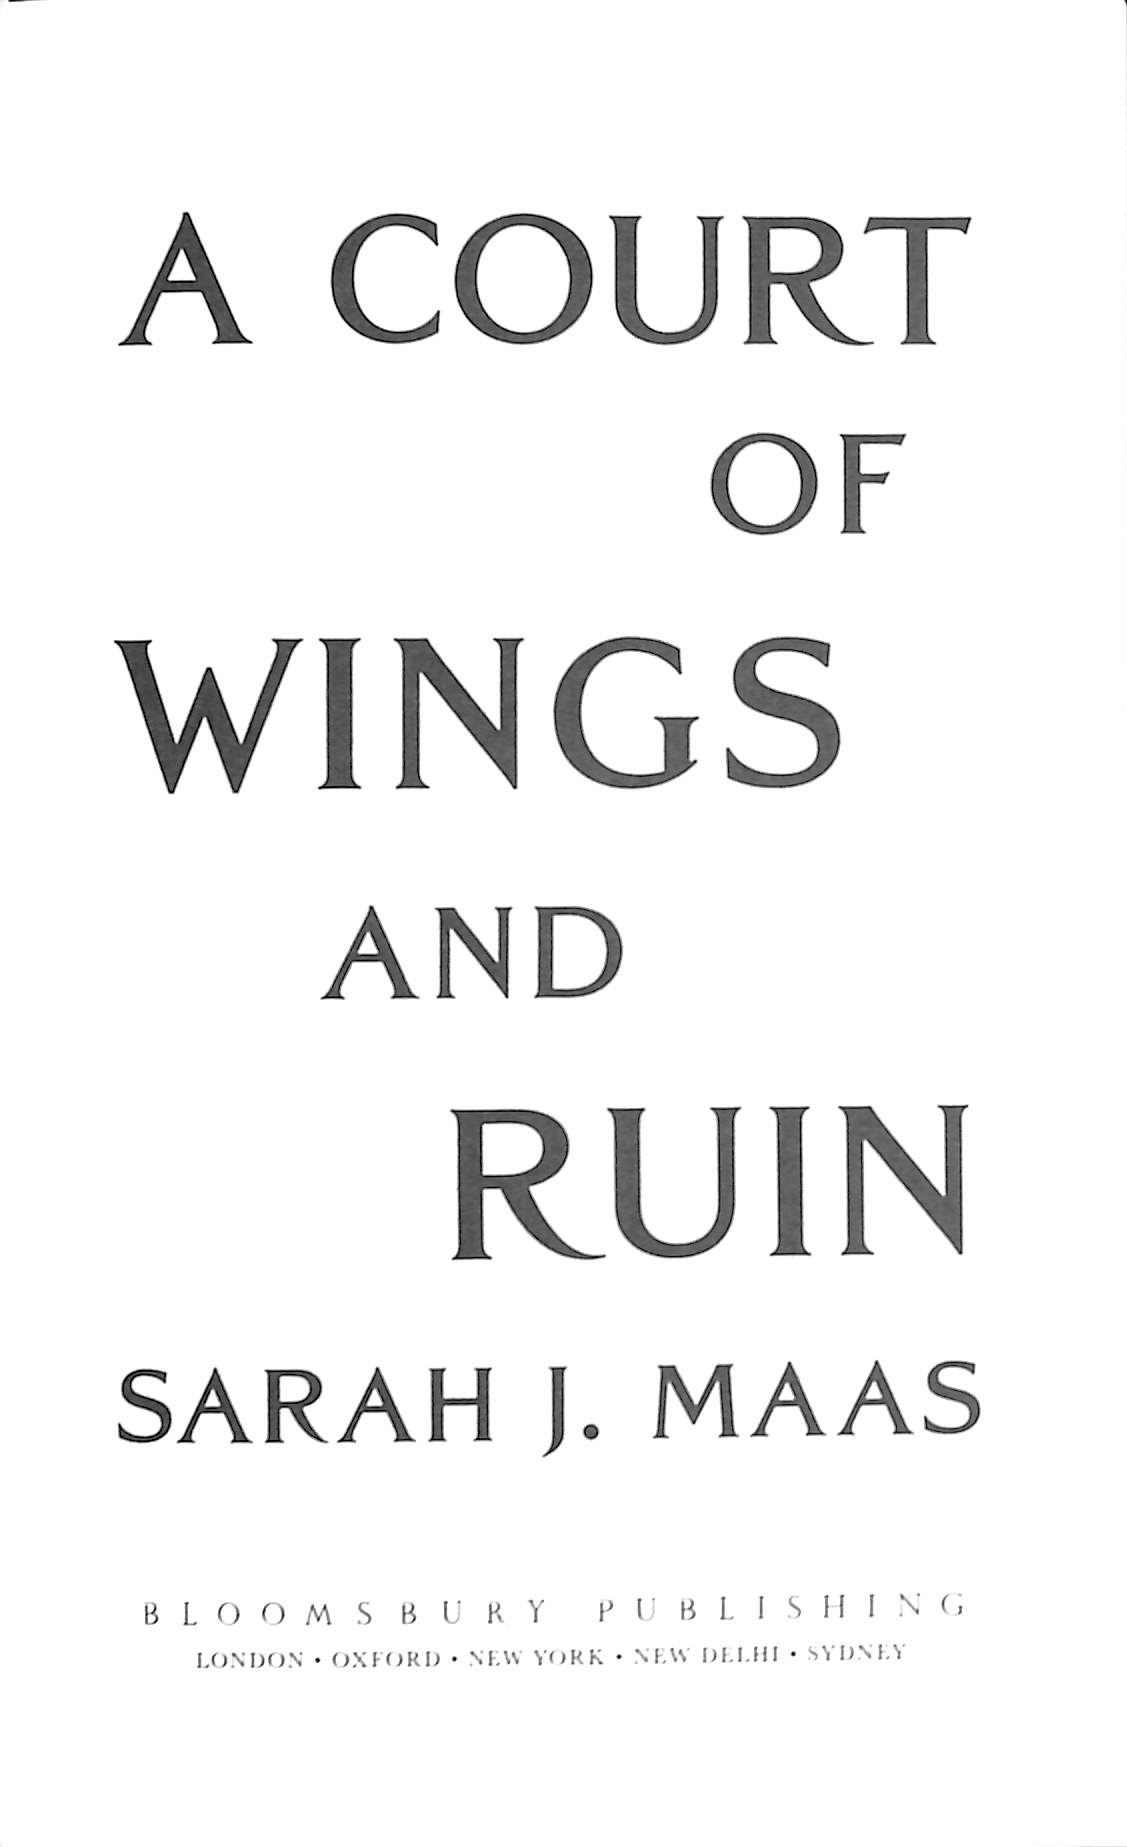 A court of wings and ruin by Sarah J. Maas